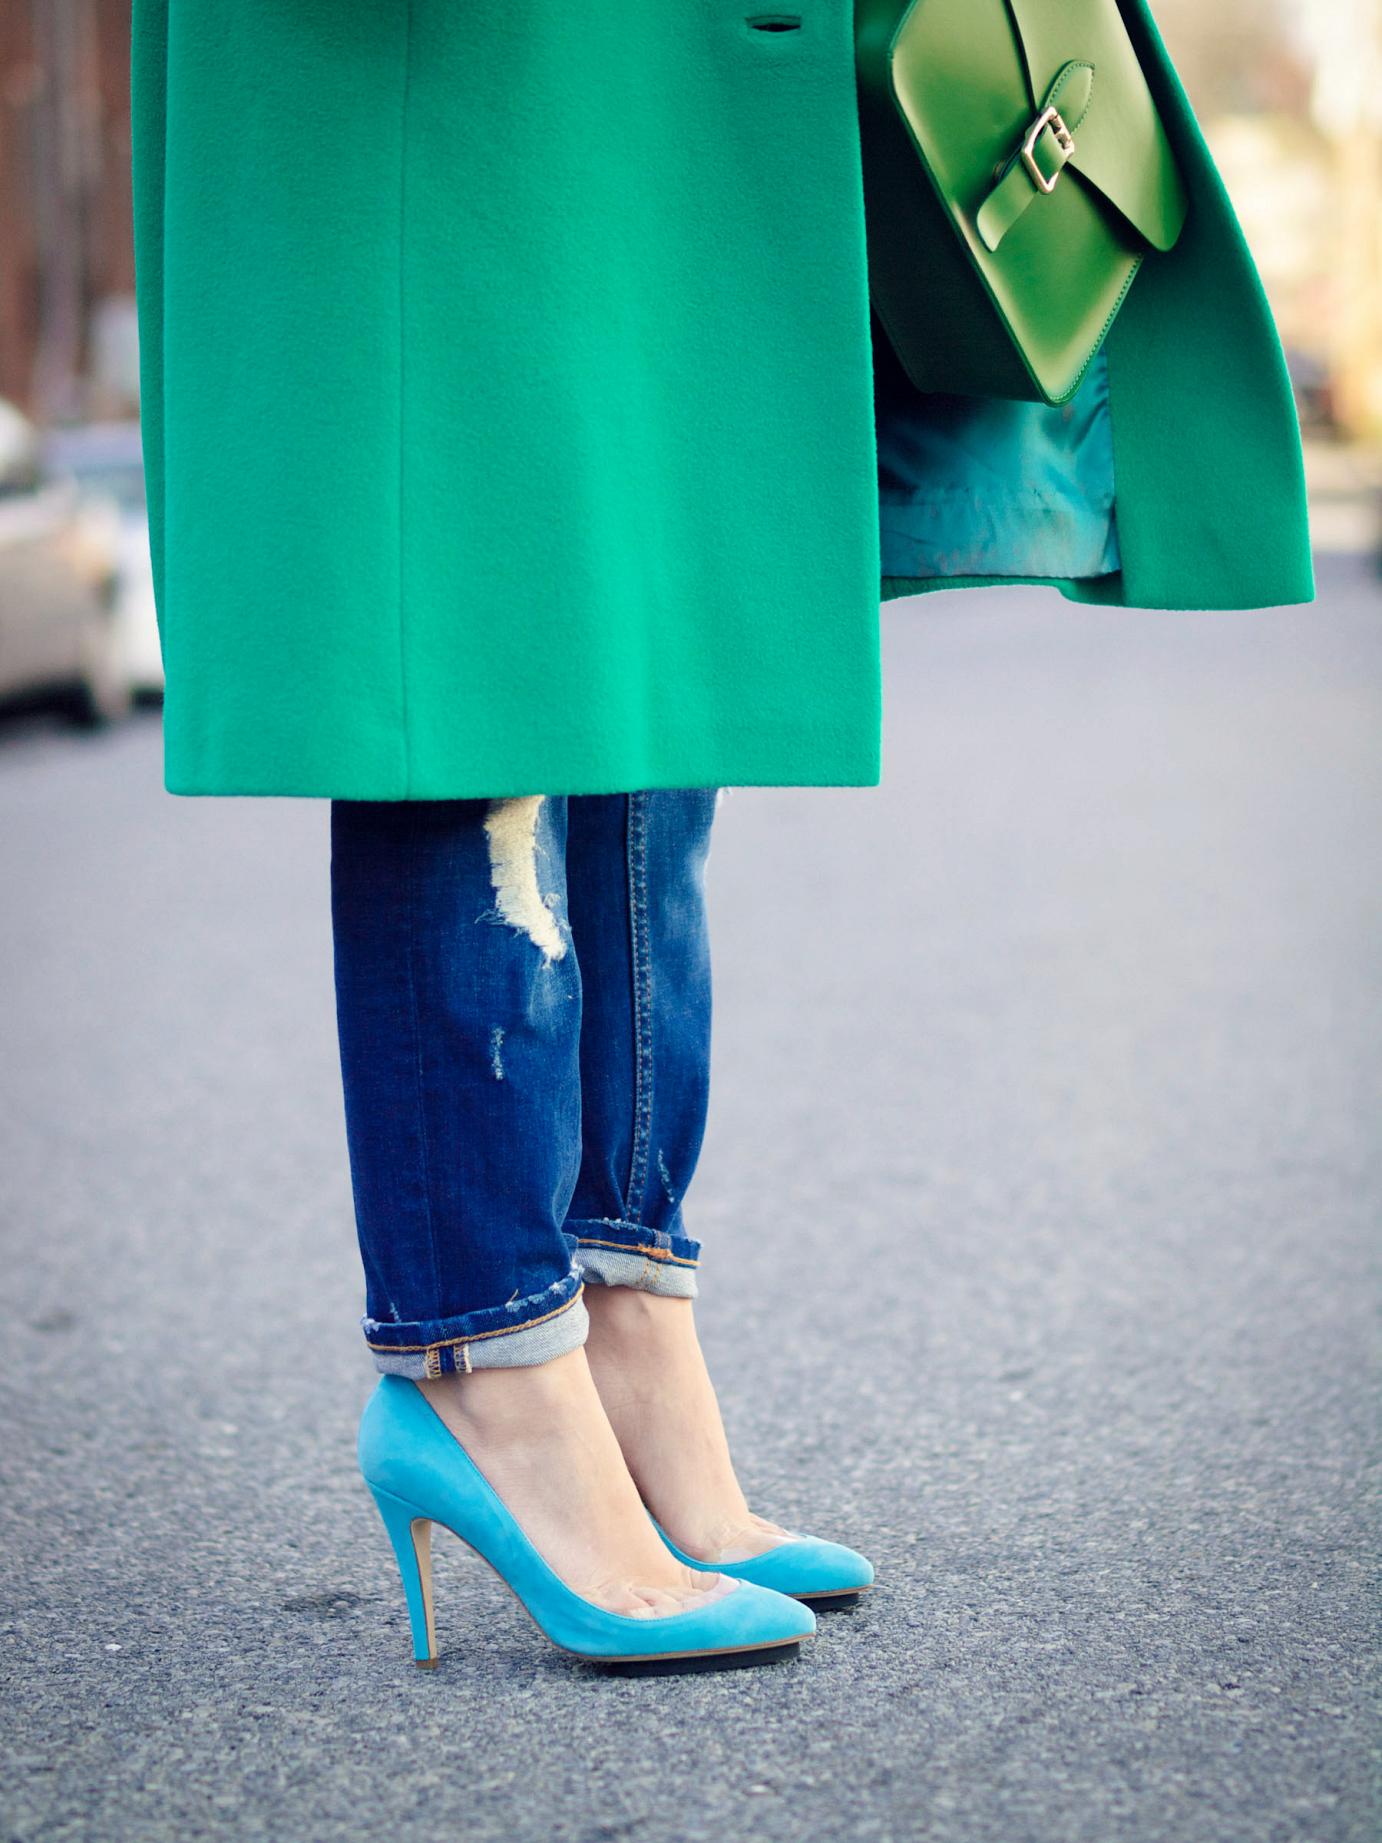 bittersweet colours, emerald green, green coat, colorful coats, ray ban, boyfriend jeans, street style, fall street style, maternity style, 26 weeks, sweater weather, 